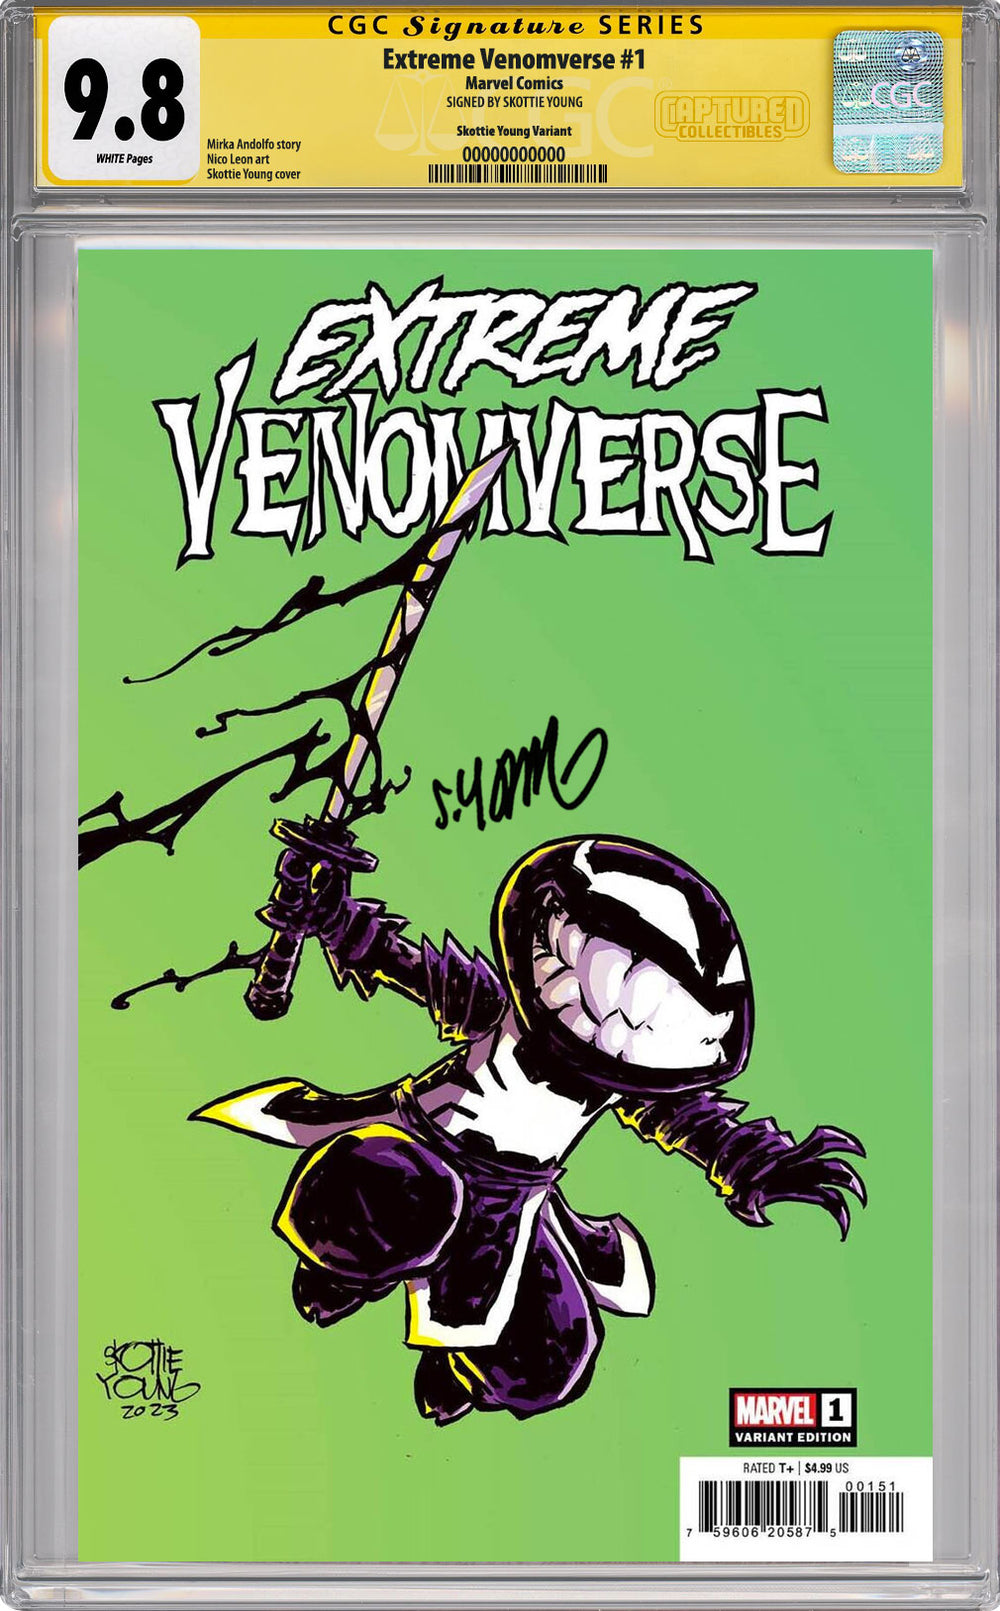 Edge of Venomverse #1 Variant CGC SS 9.8 Signed by Skottie Young